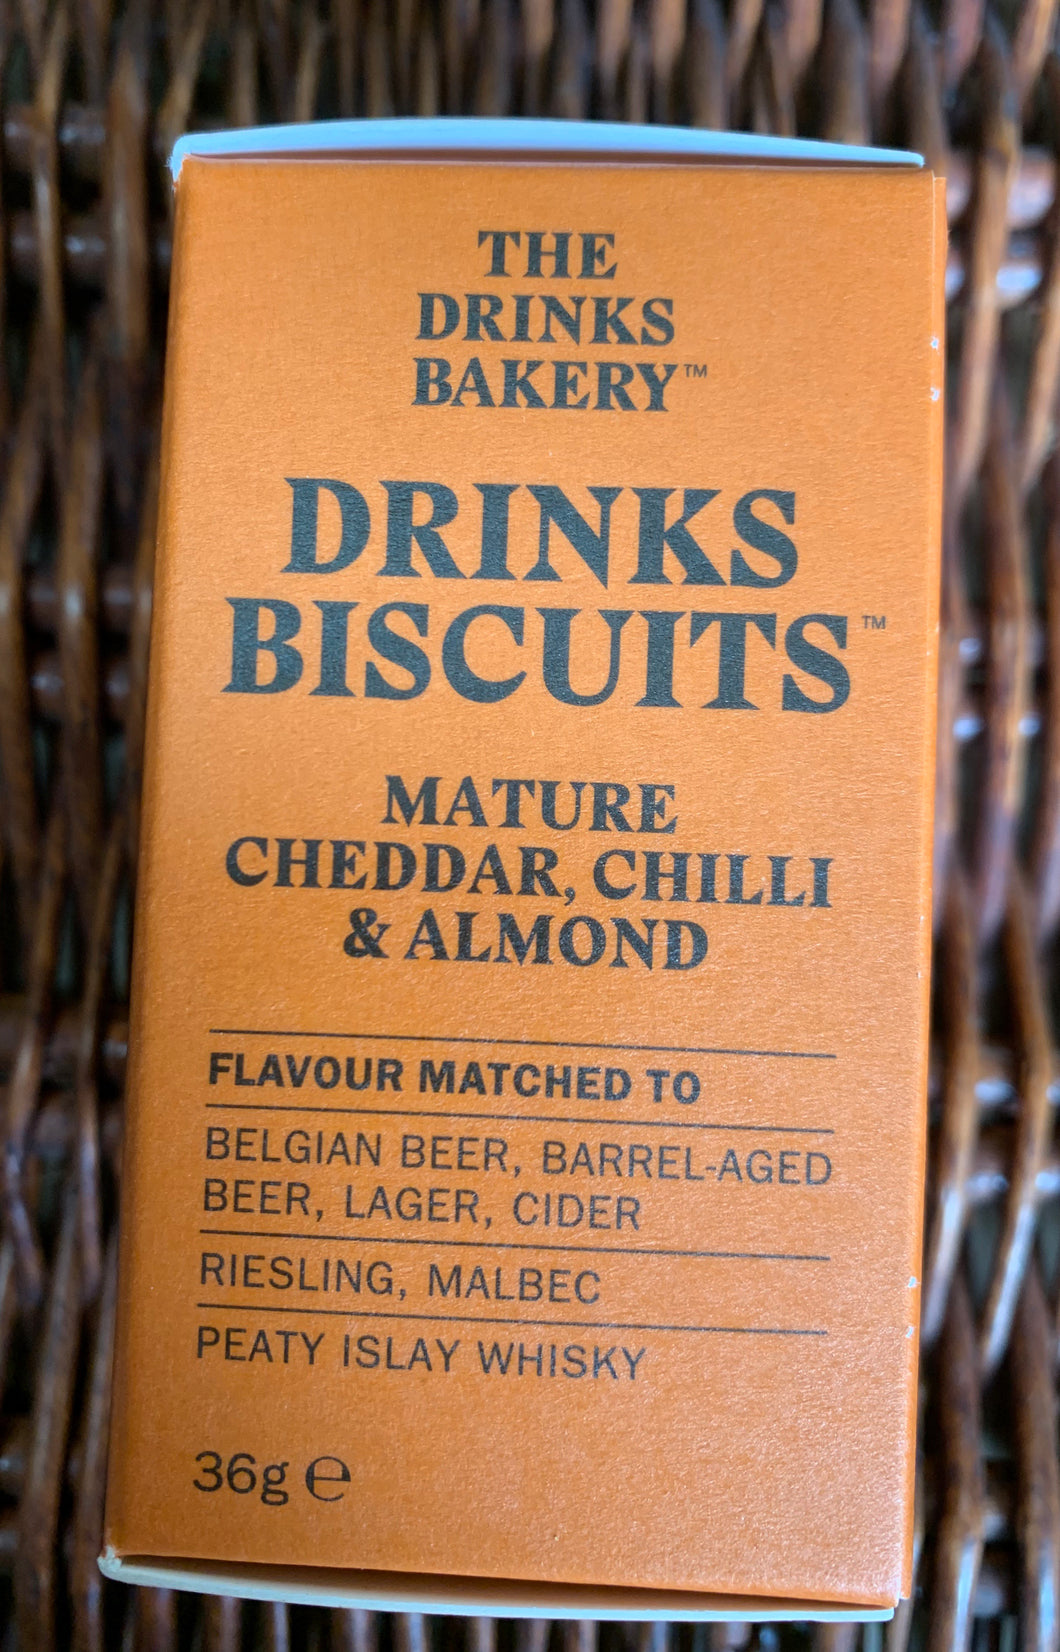 The Drinks Bakery - Mature Cheddar, Chilli & Almond Biscuits 36g